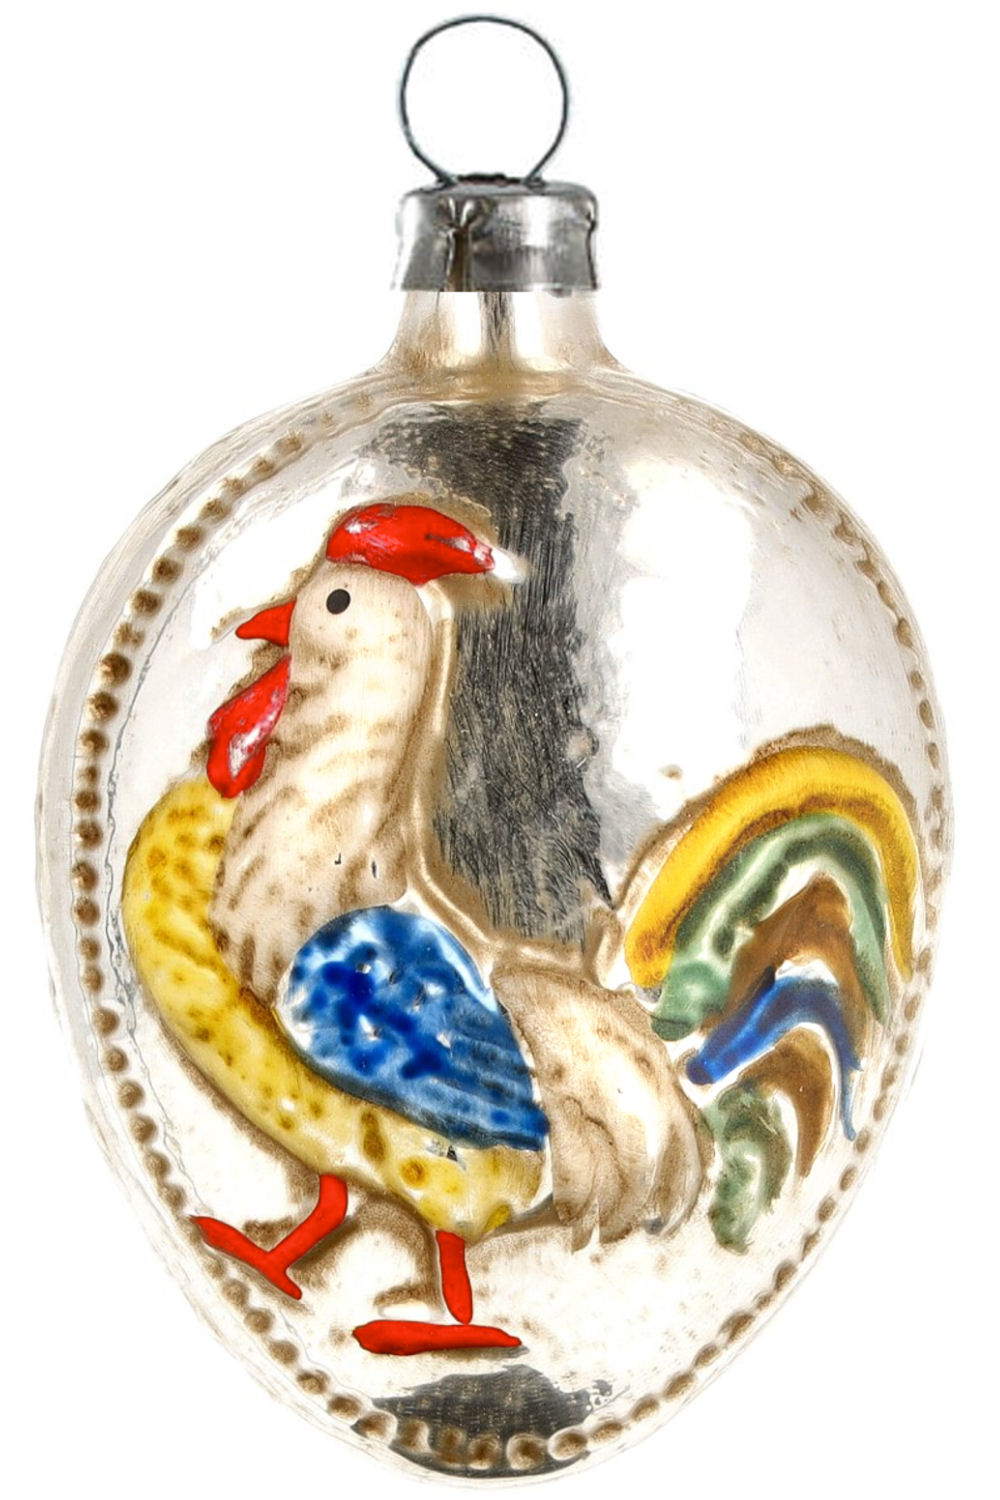 Egg with rooster and knobs